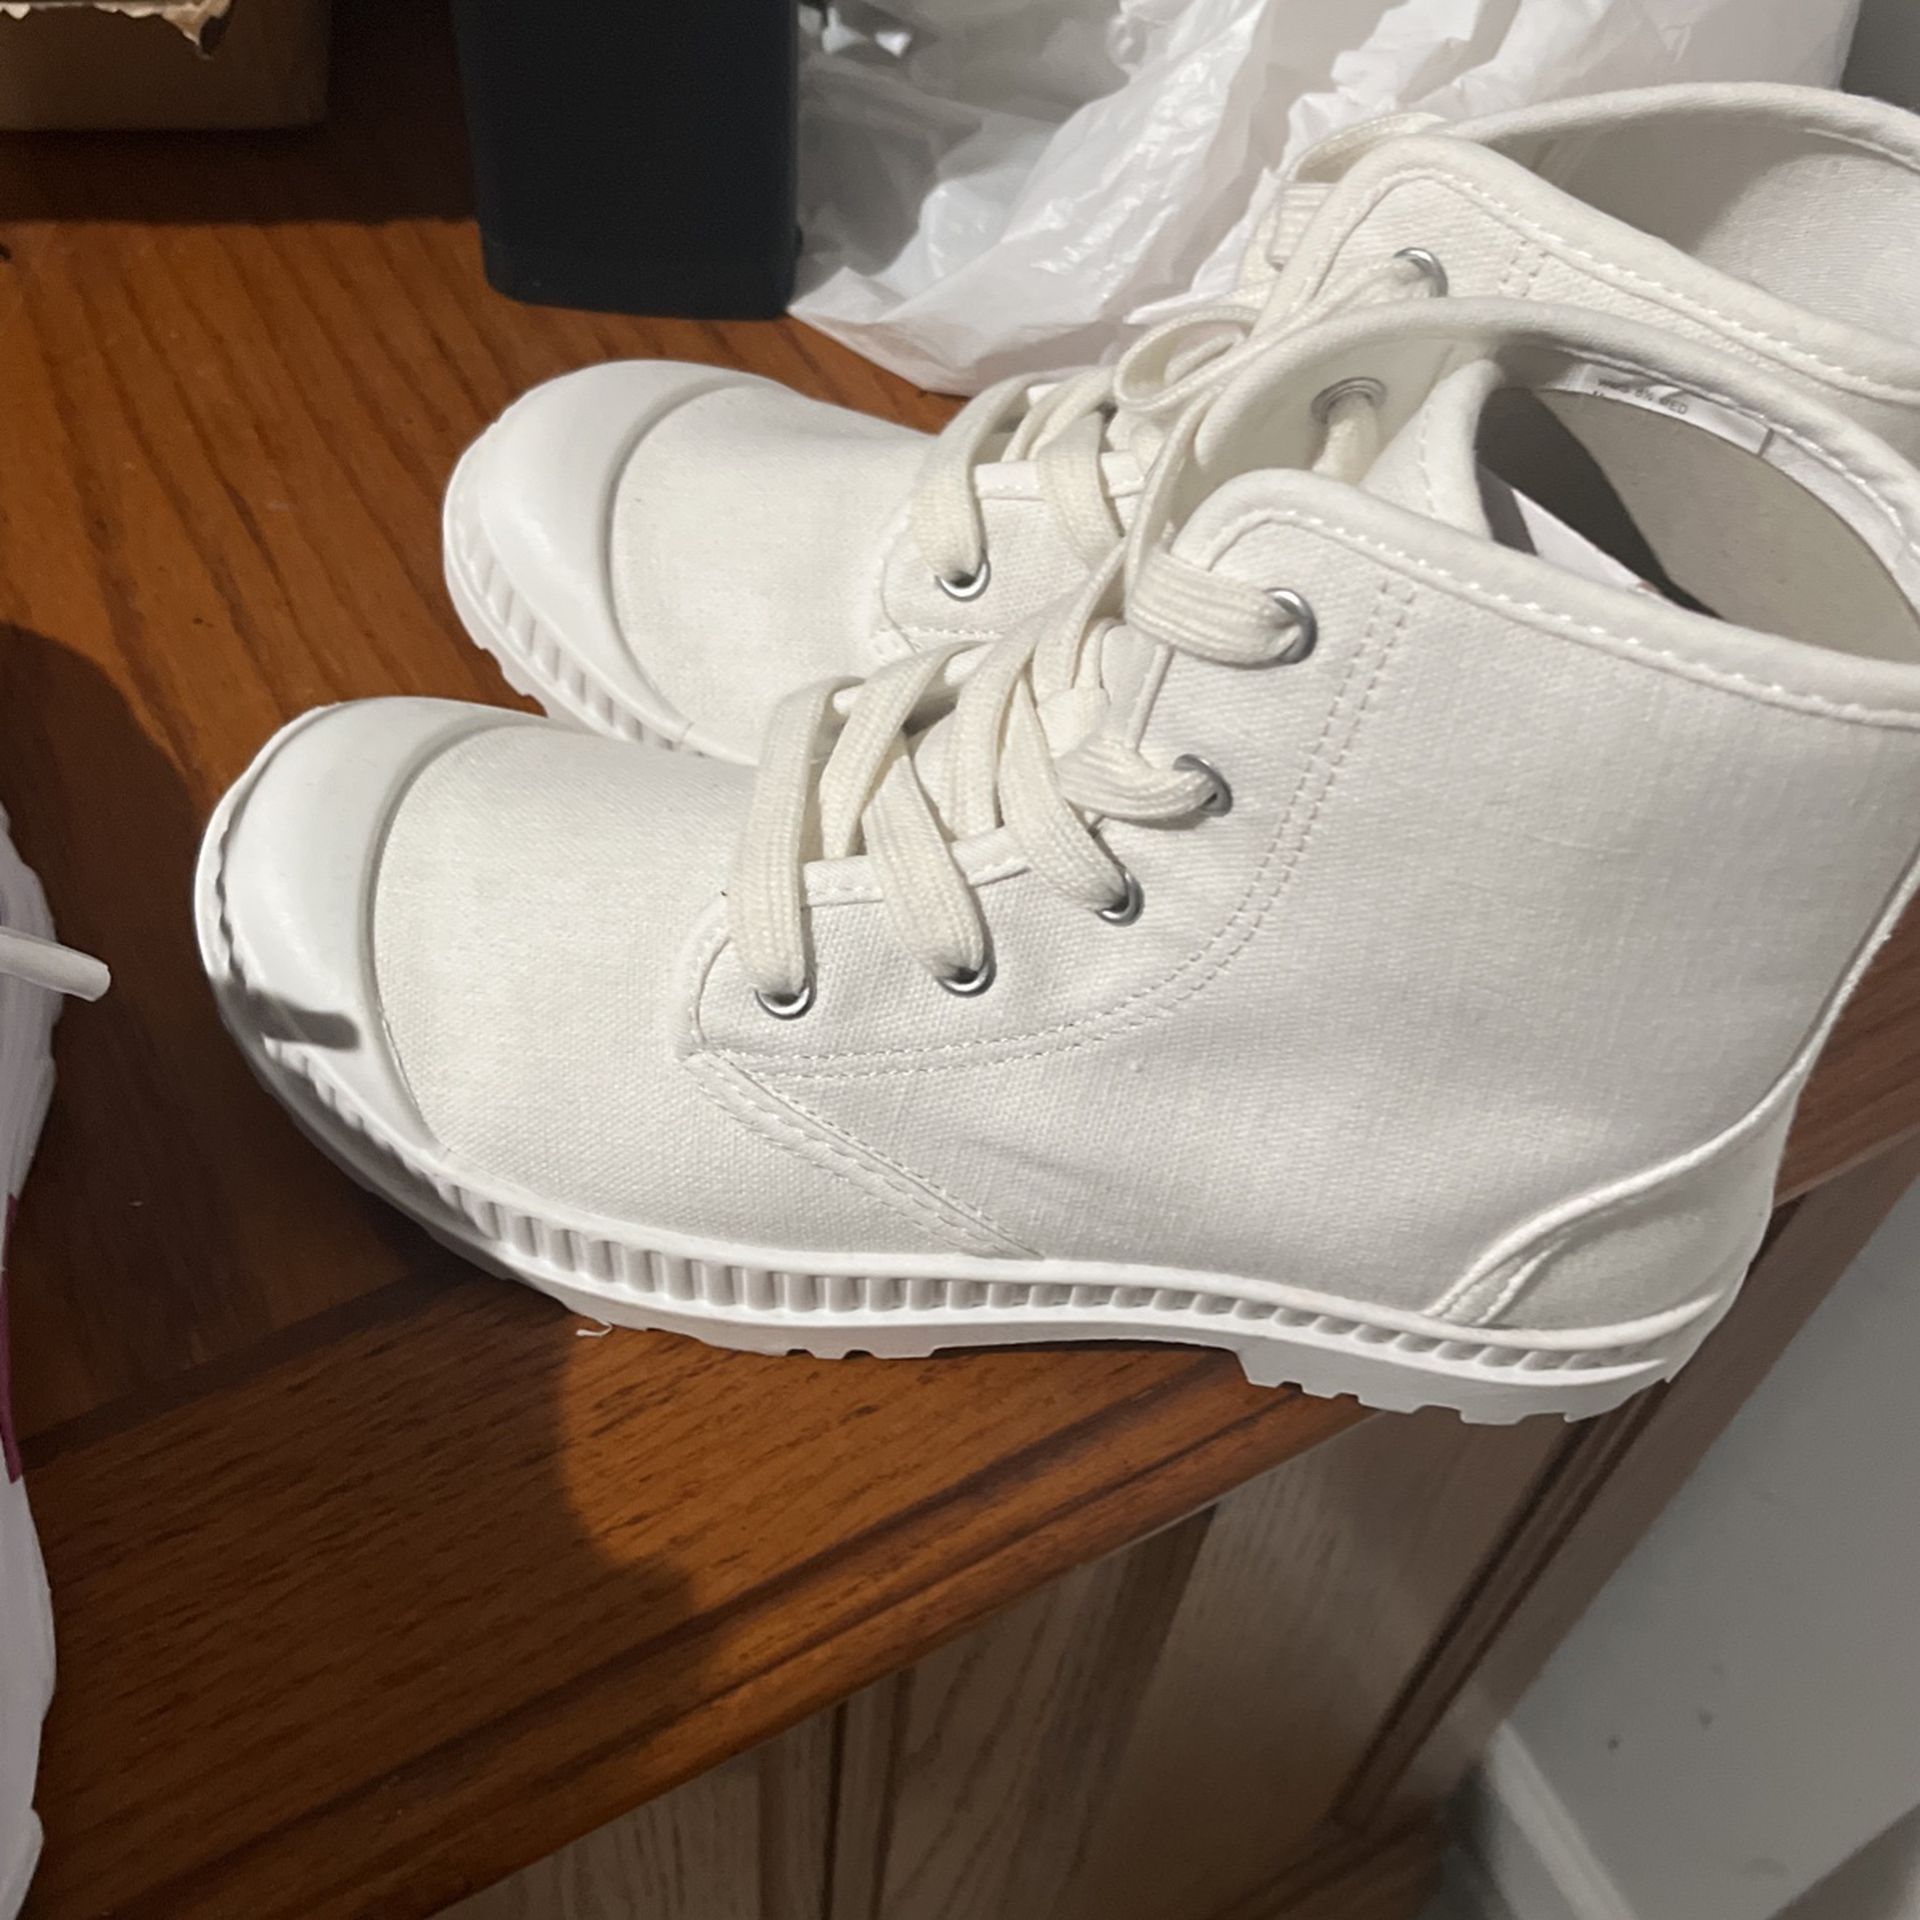 White Boots From Kohls